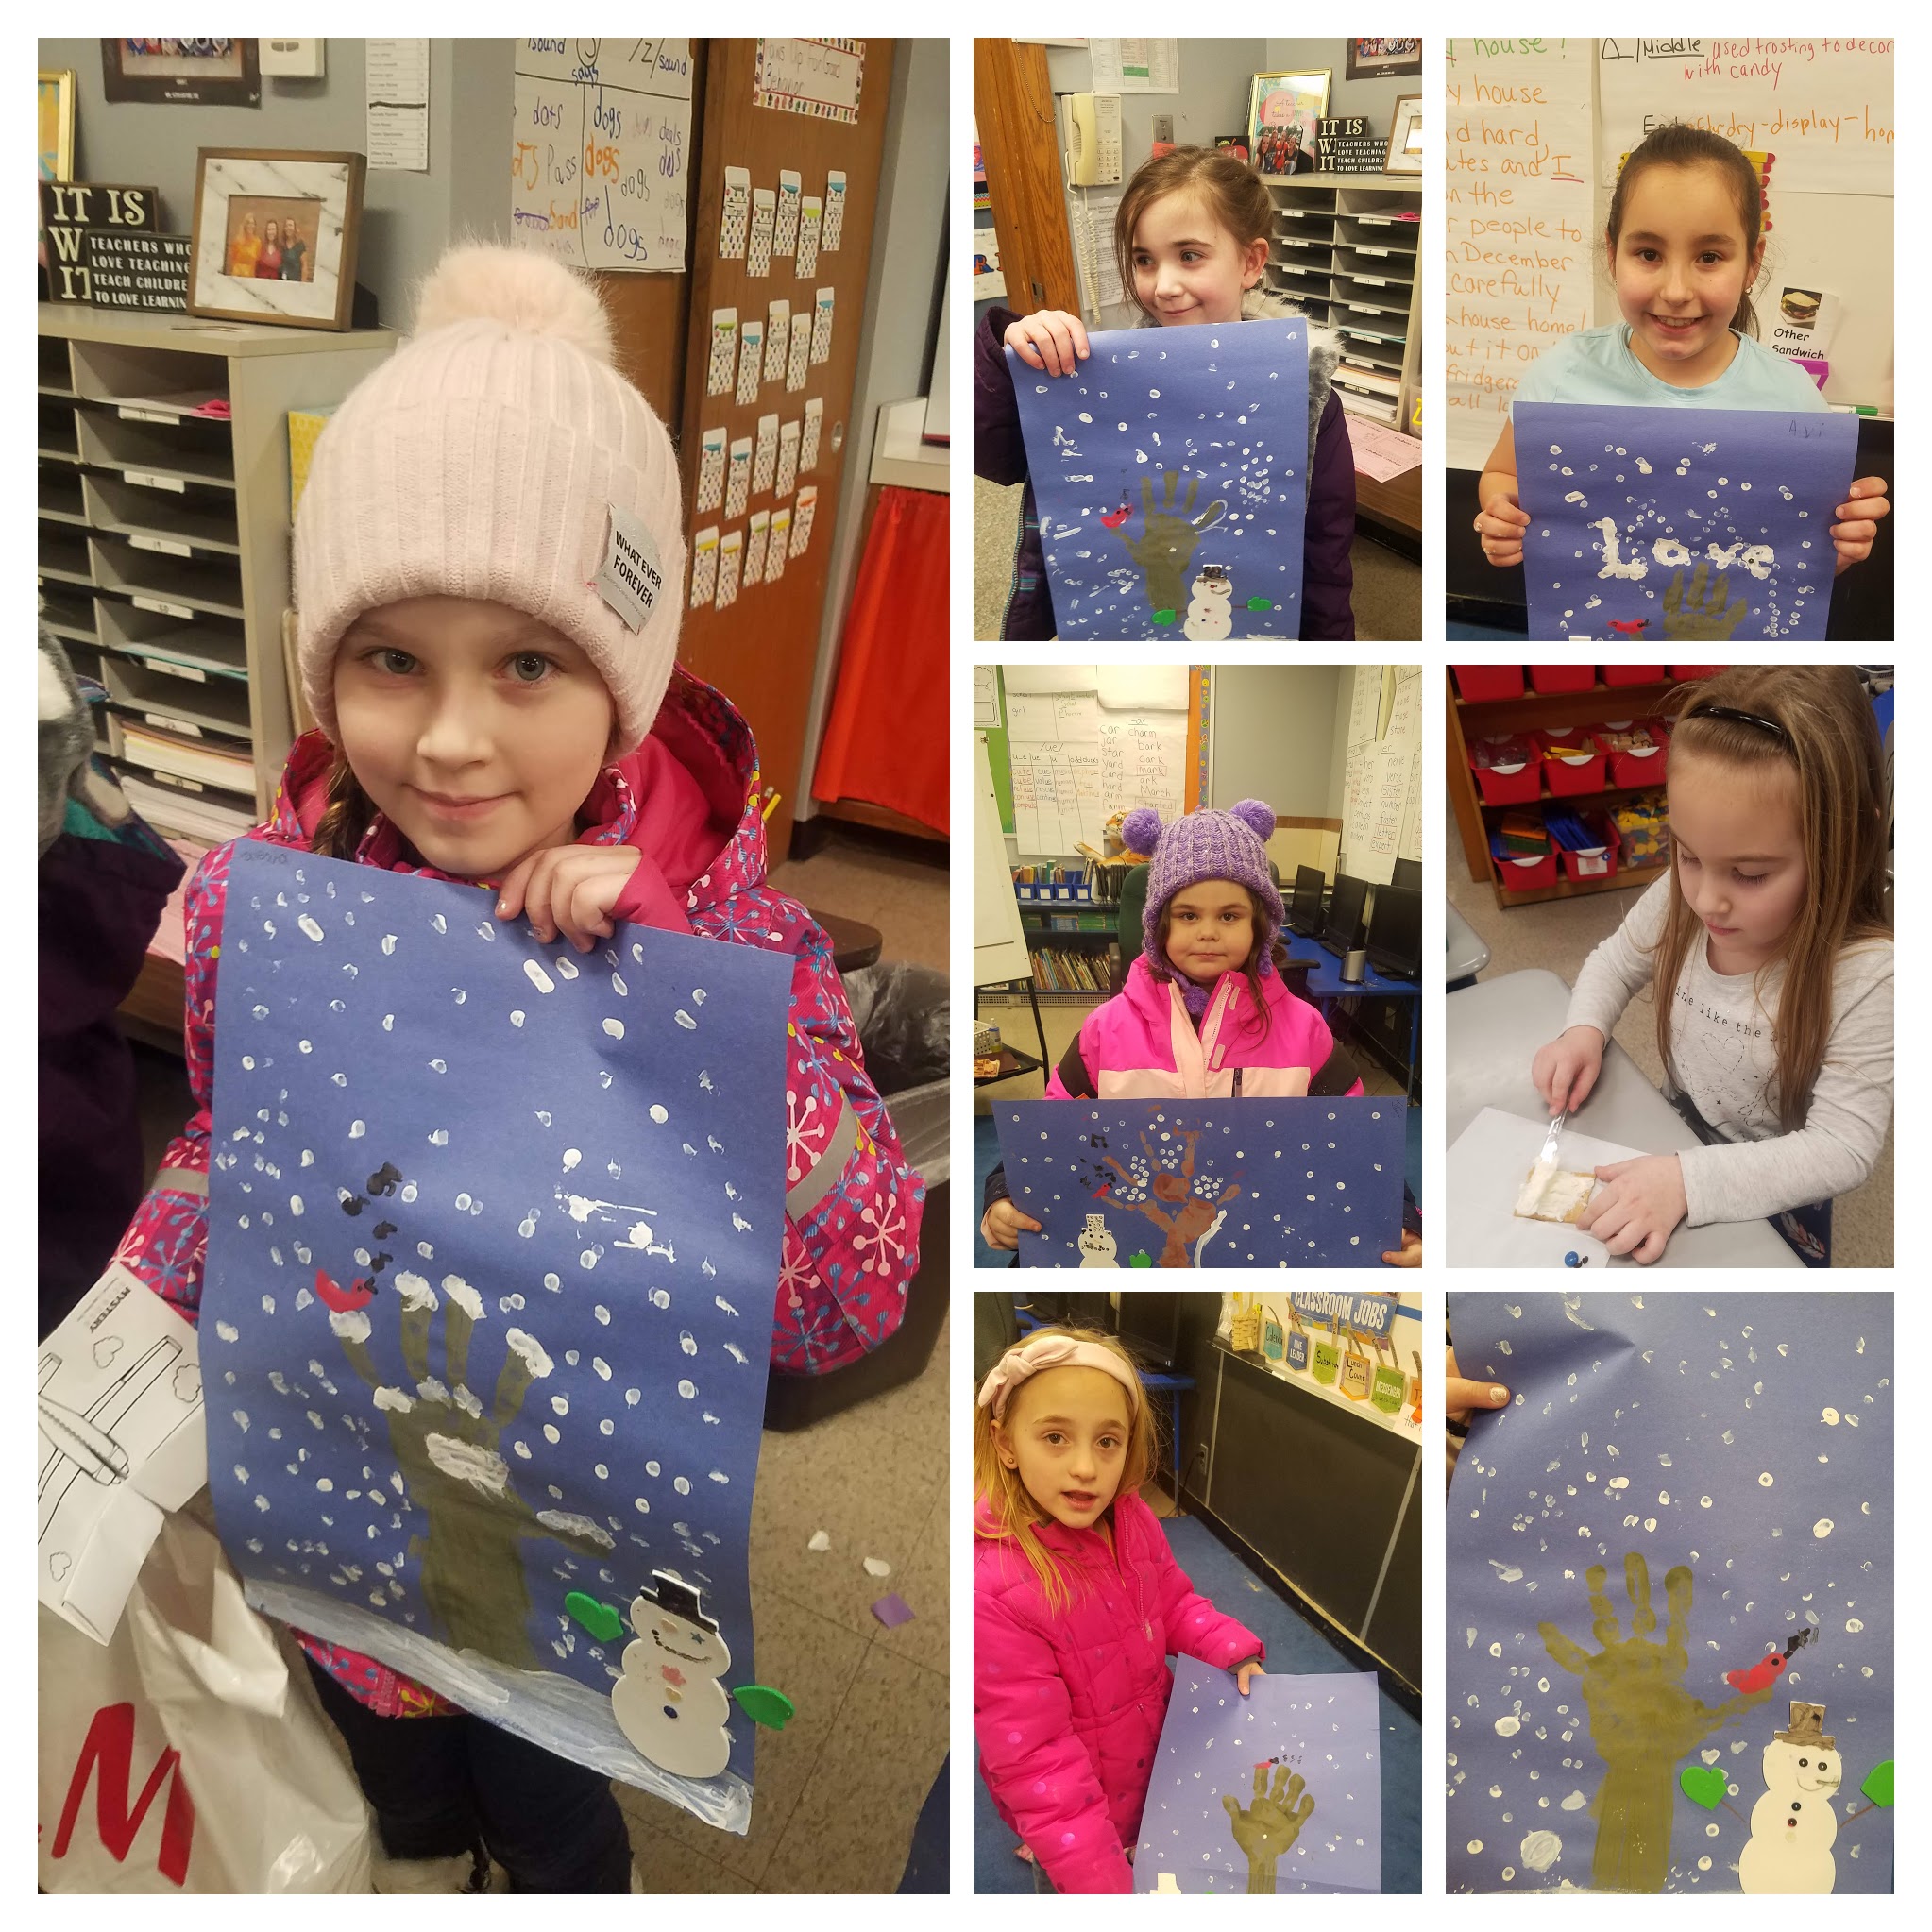 Students working on snow paintings